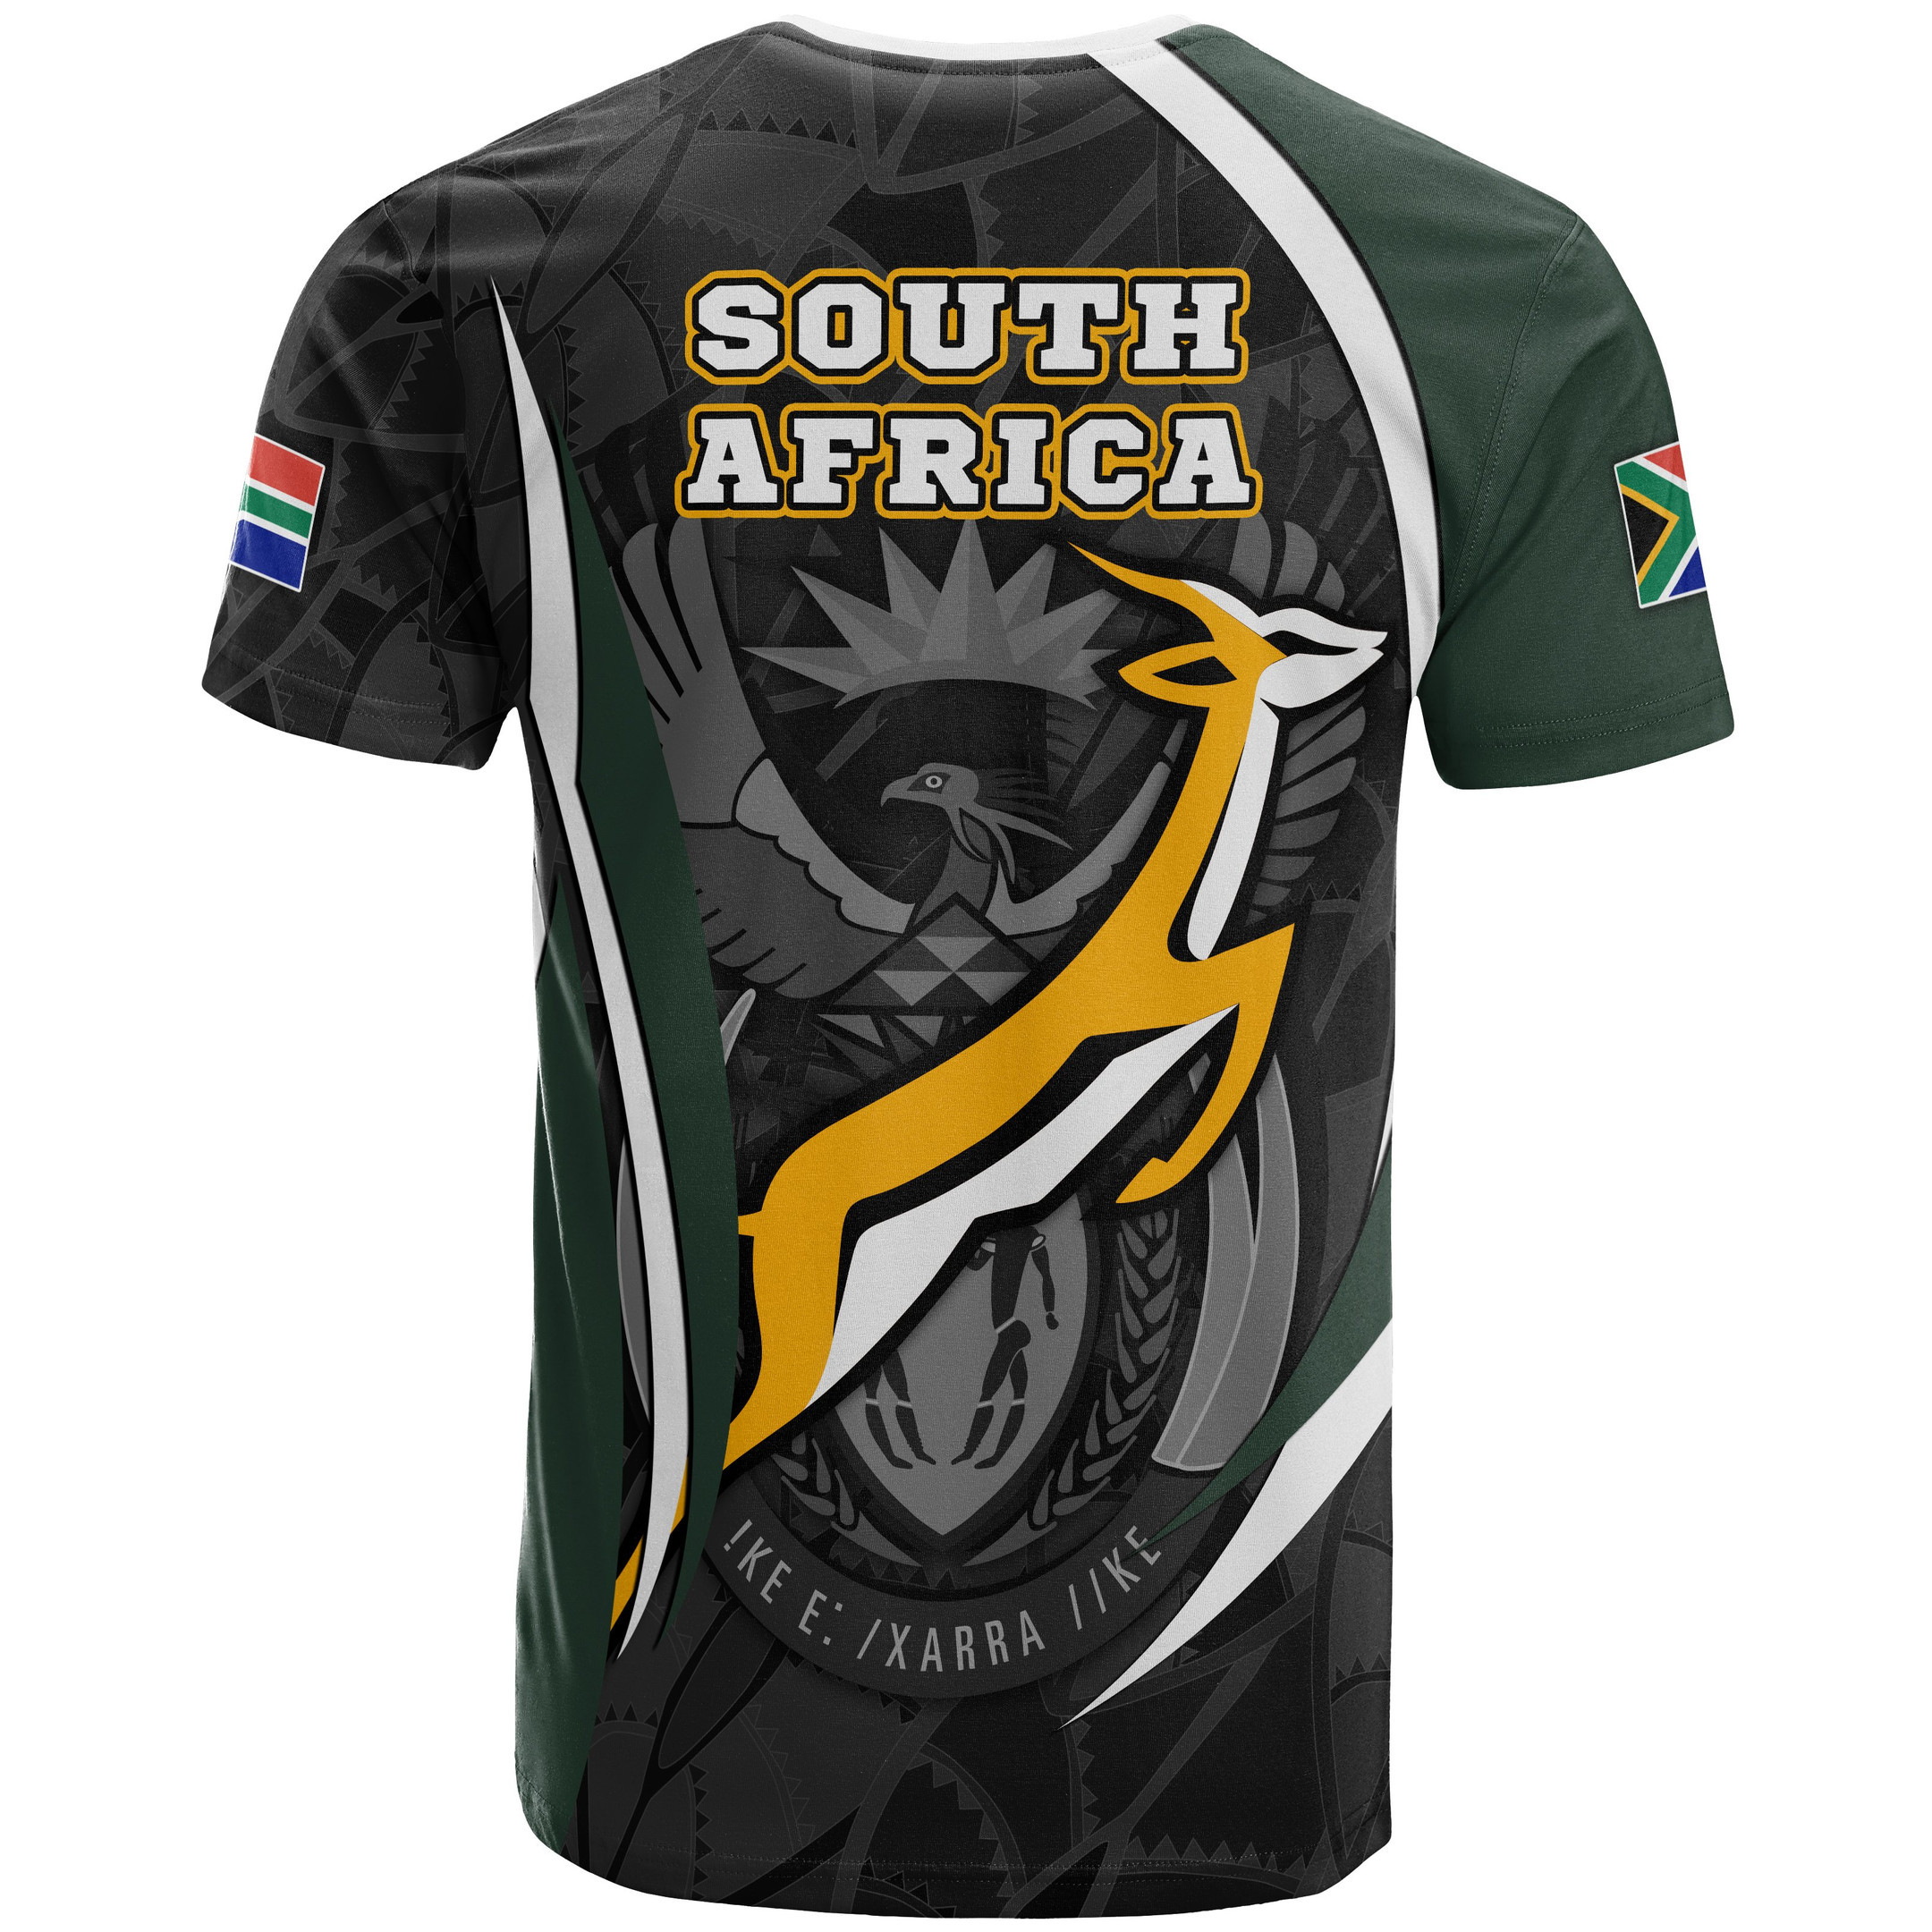 South Africa T-Shirt - South African Spirit (White)